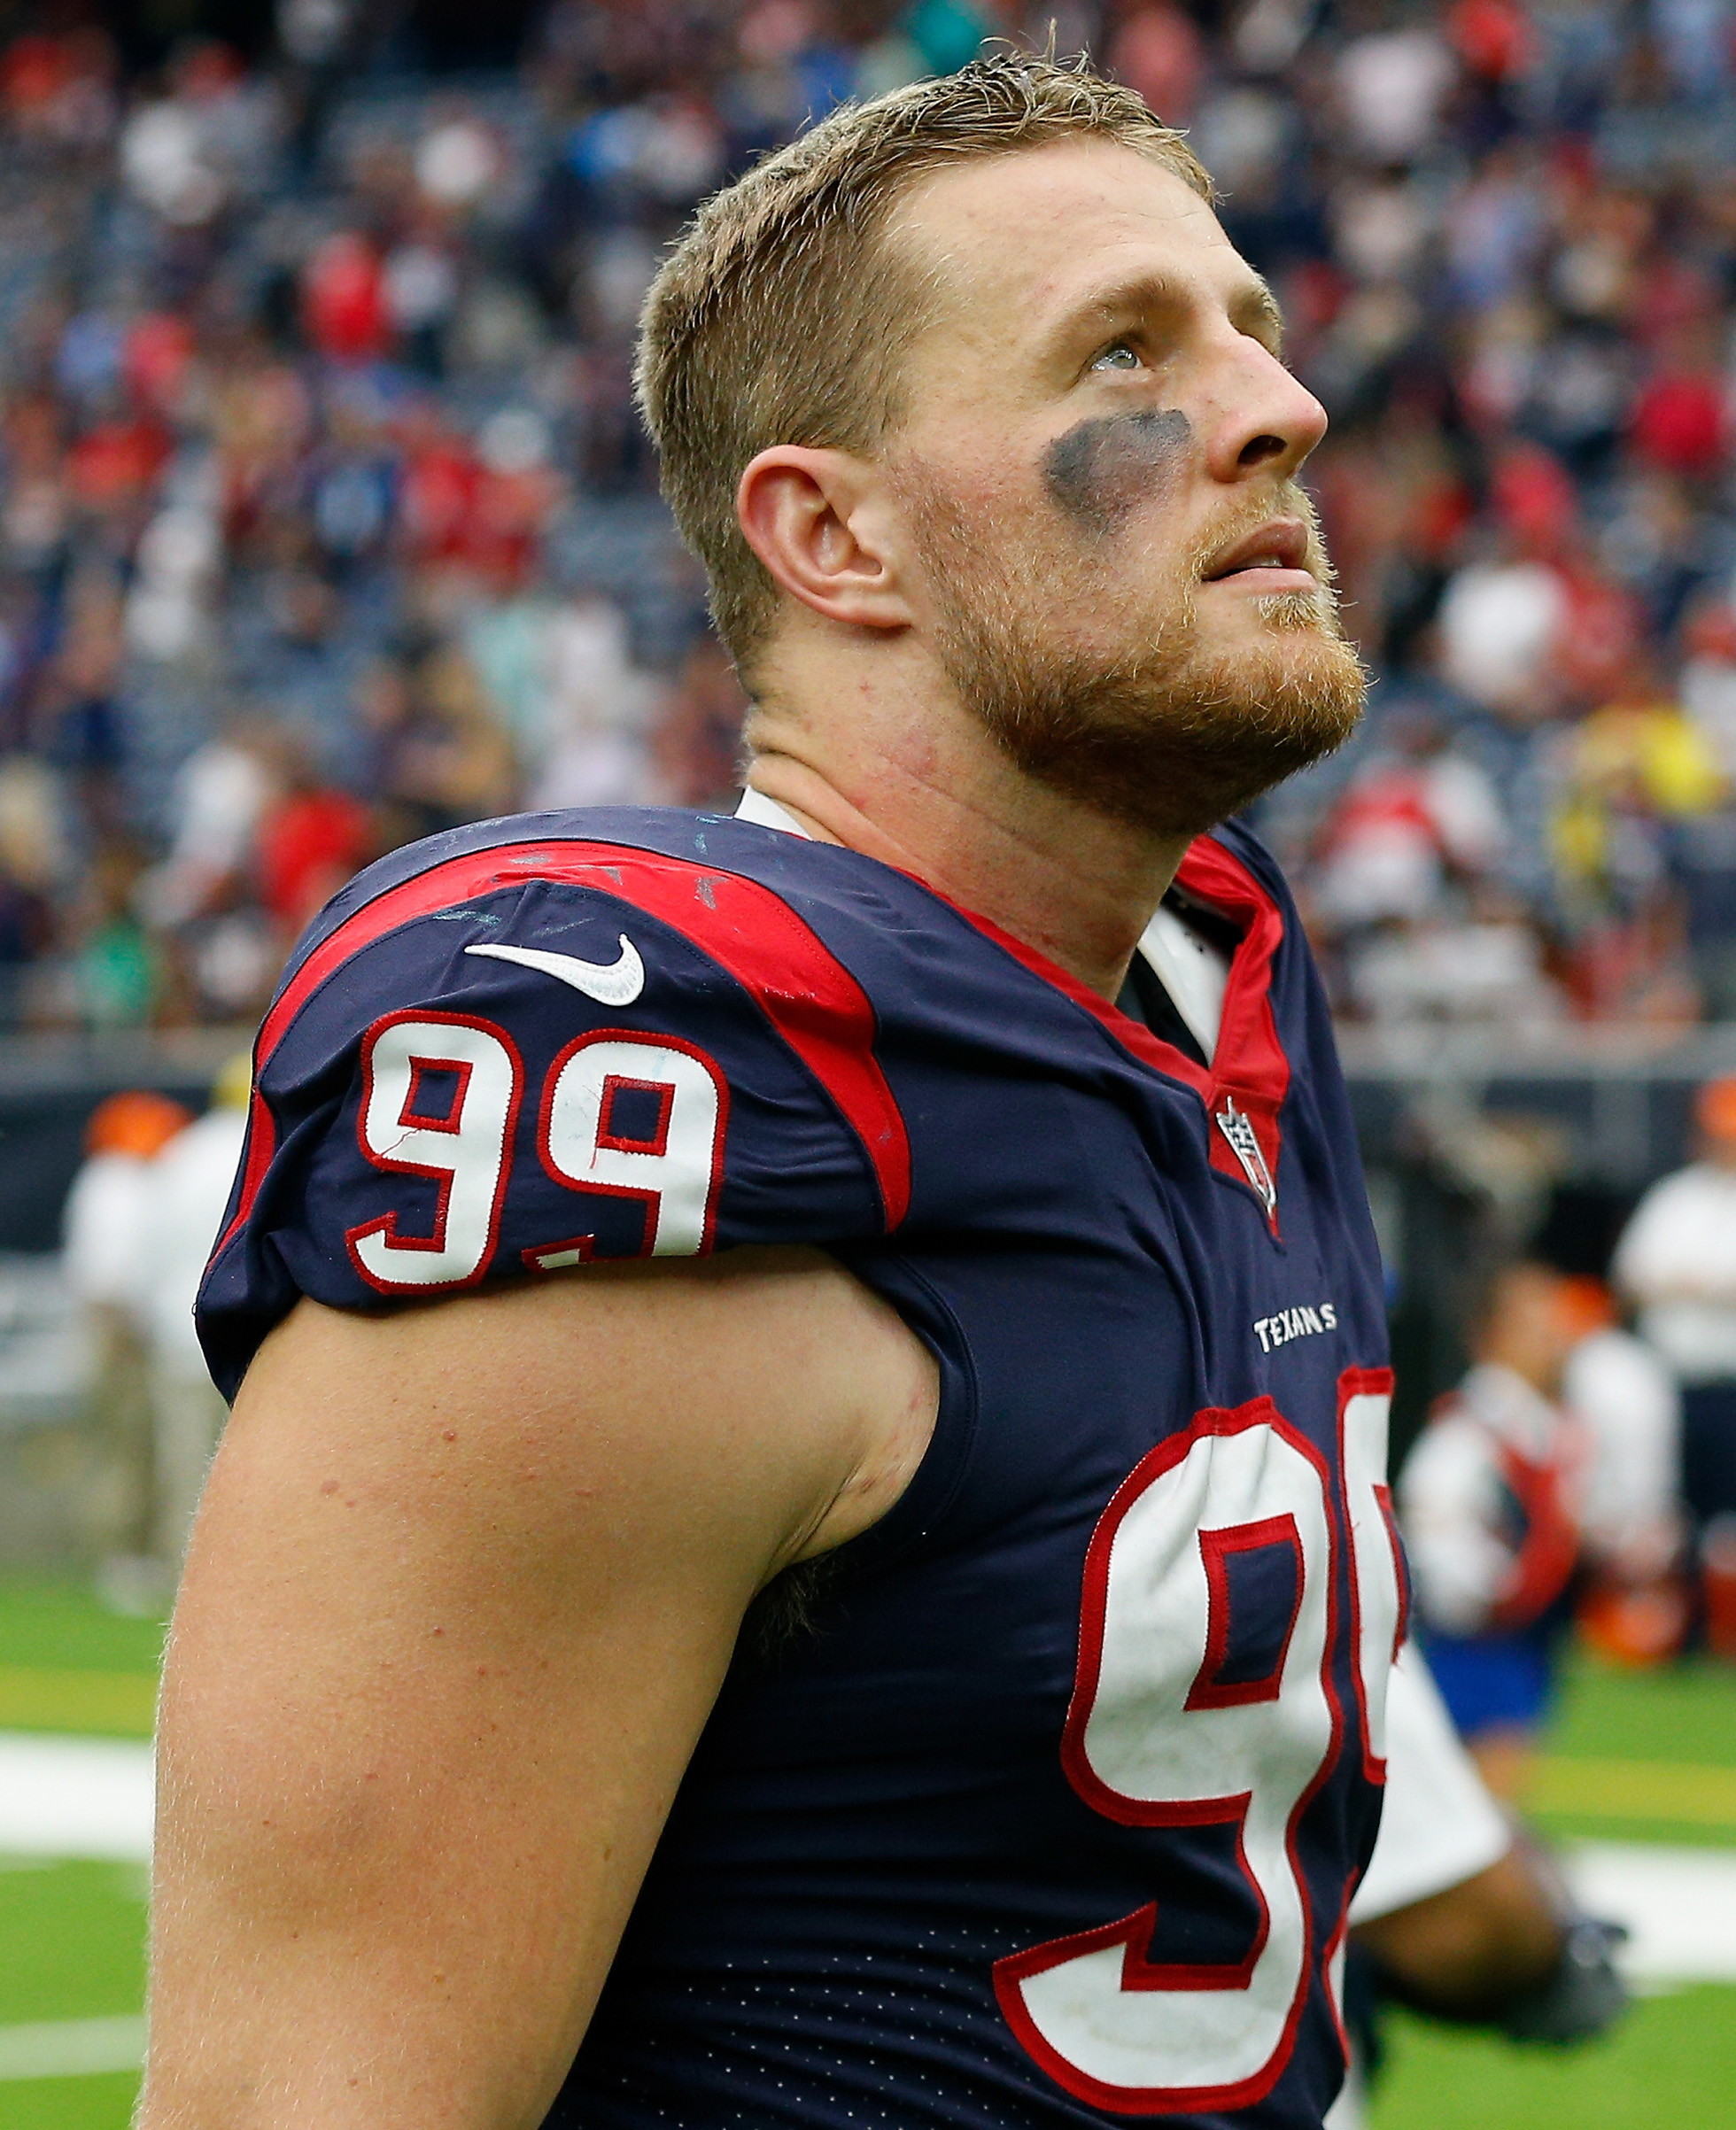 J.J. Watt named one of Time magazine's 100 most influential people